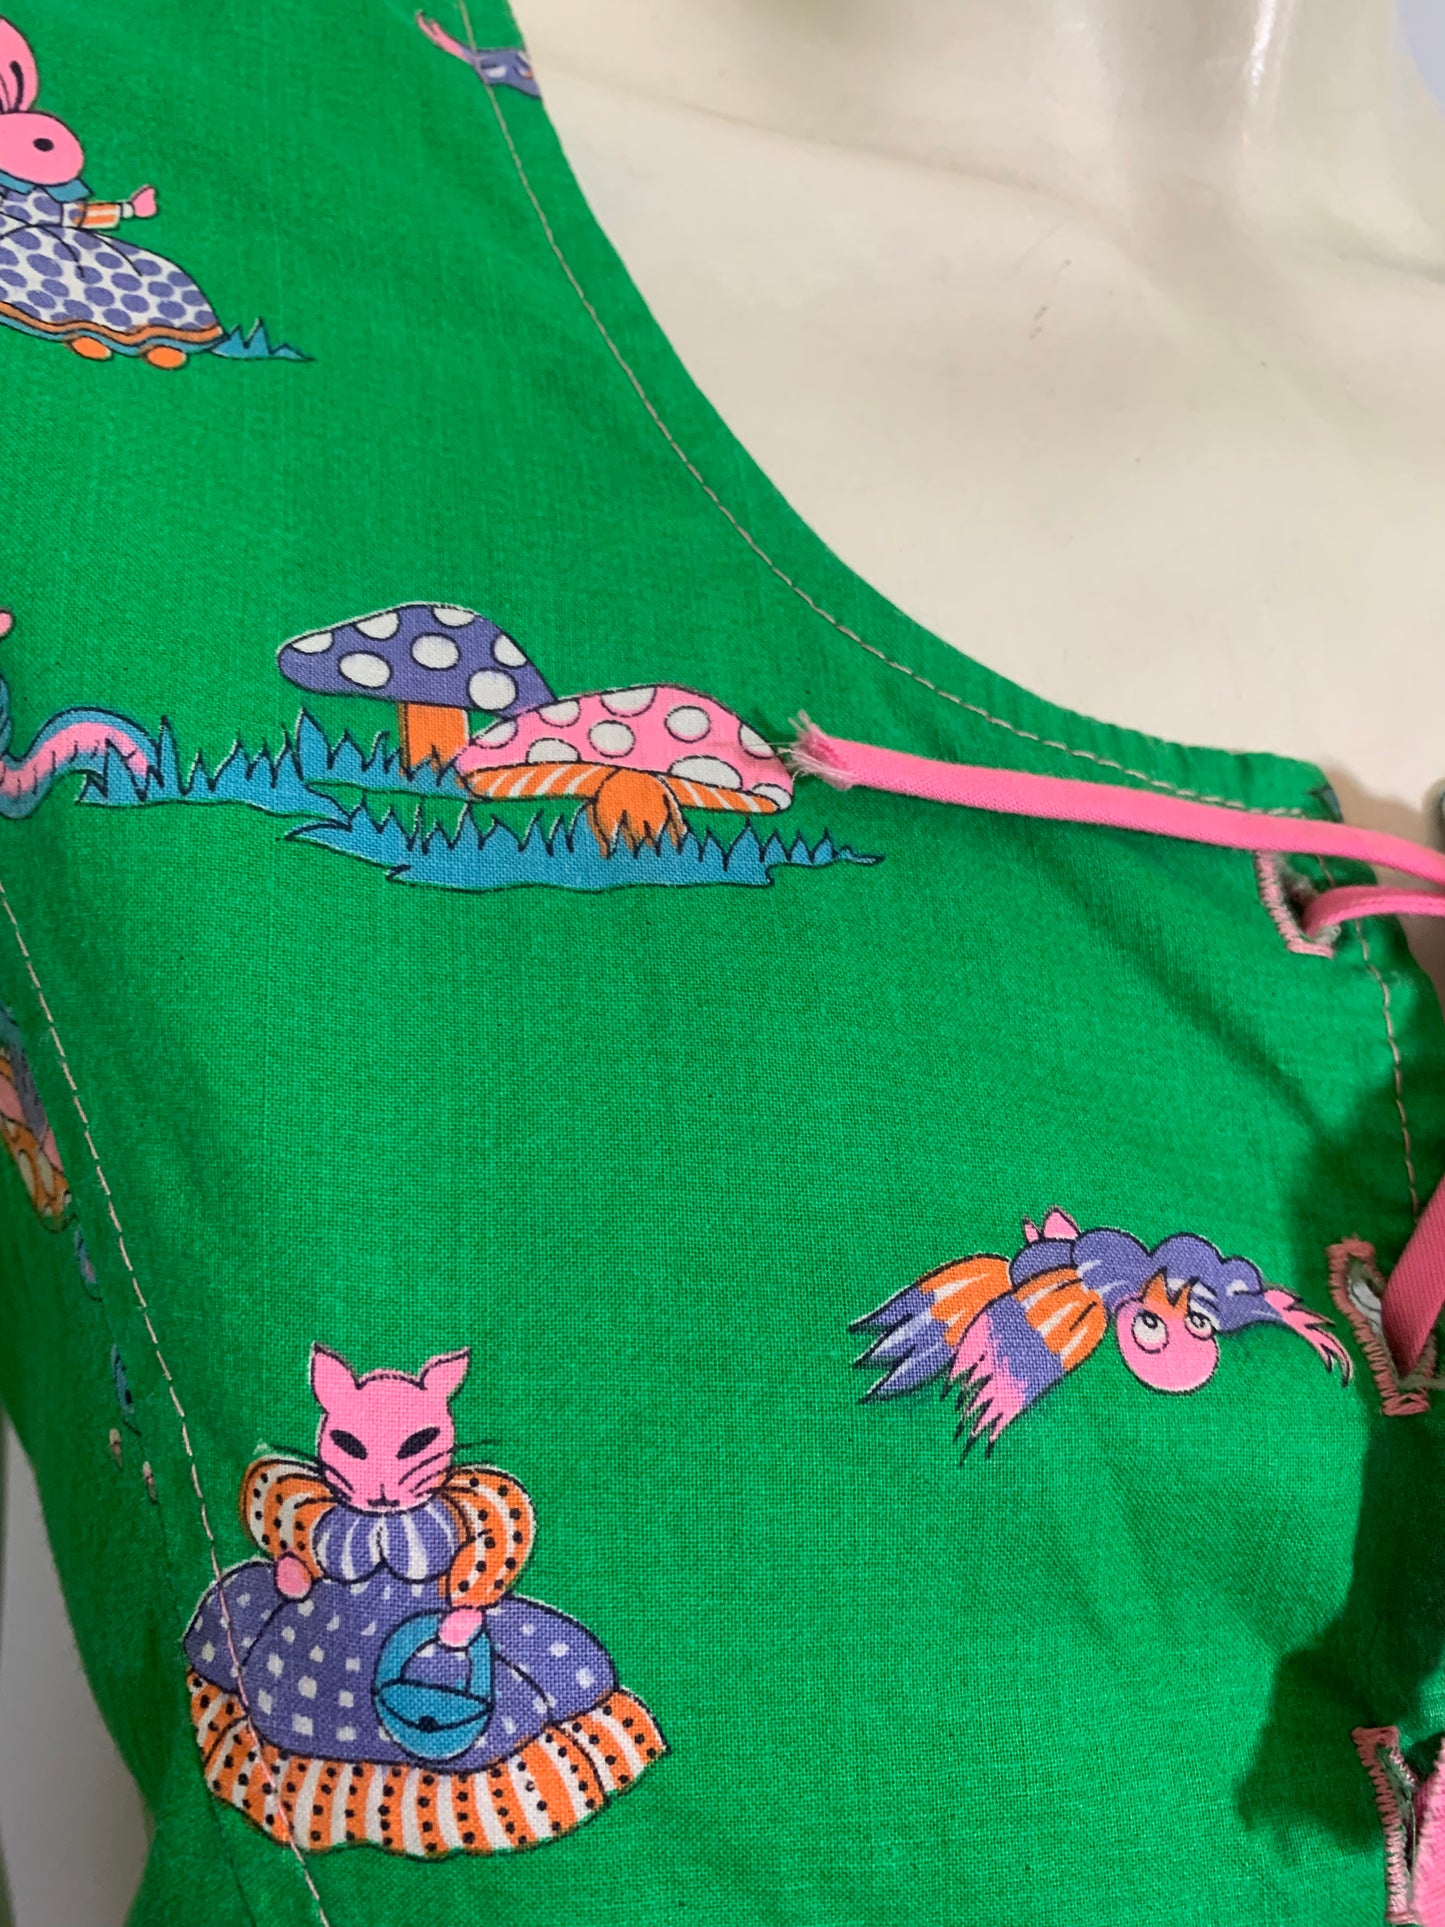 Kitschy Cute Bunny, Cats, Birds and Worms Print Babydoll Blouse circa 1970s